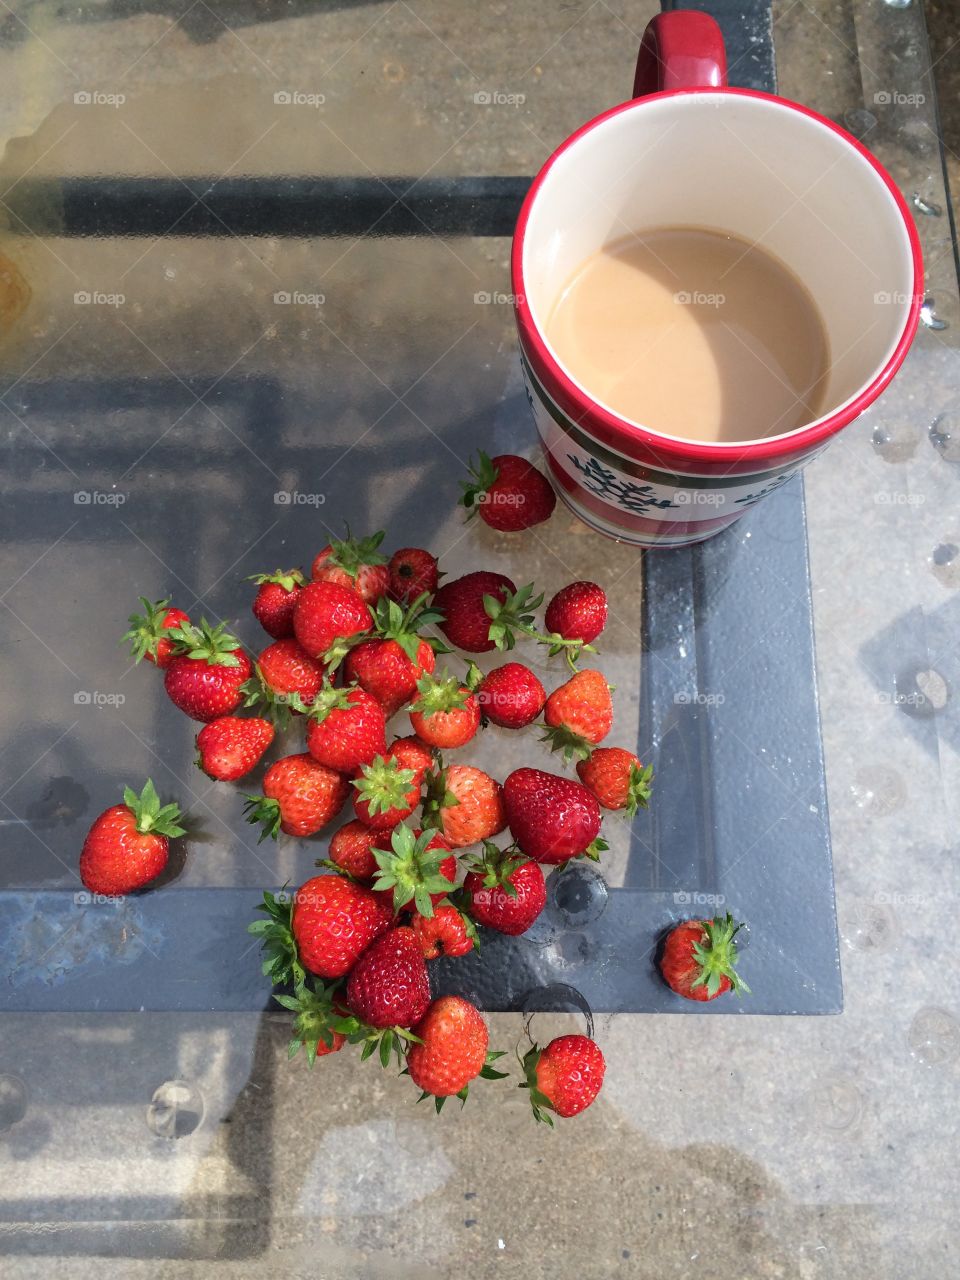 Picking Strawberries with Morning coffee